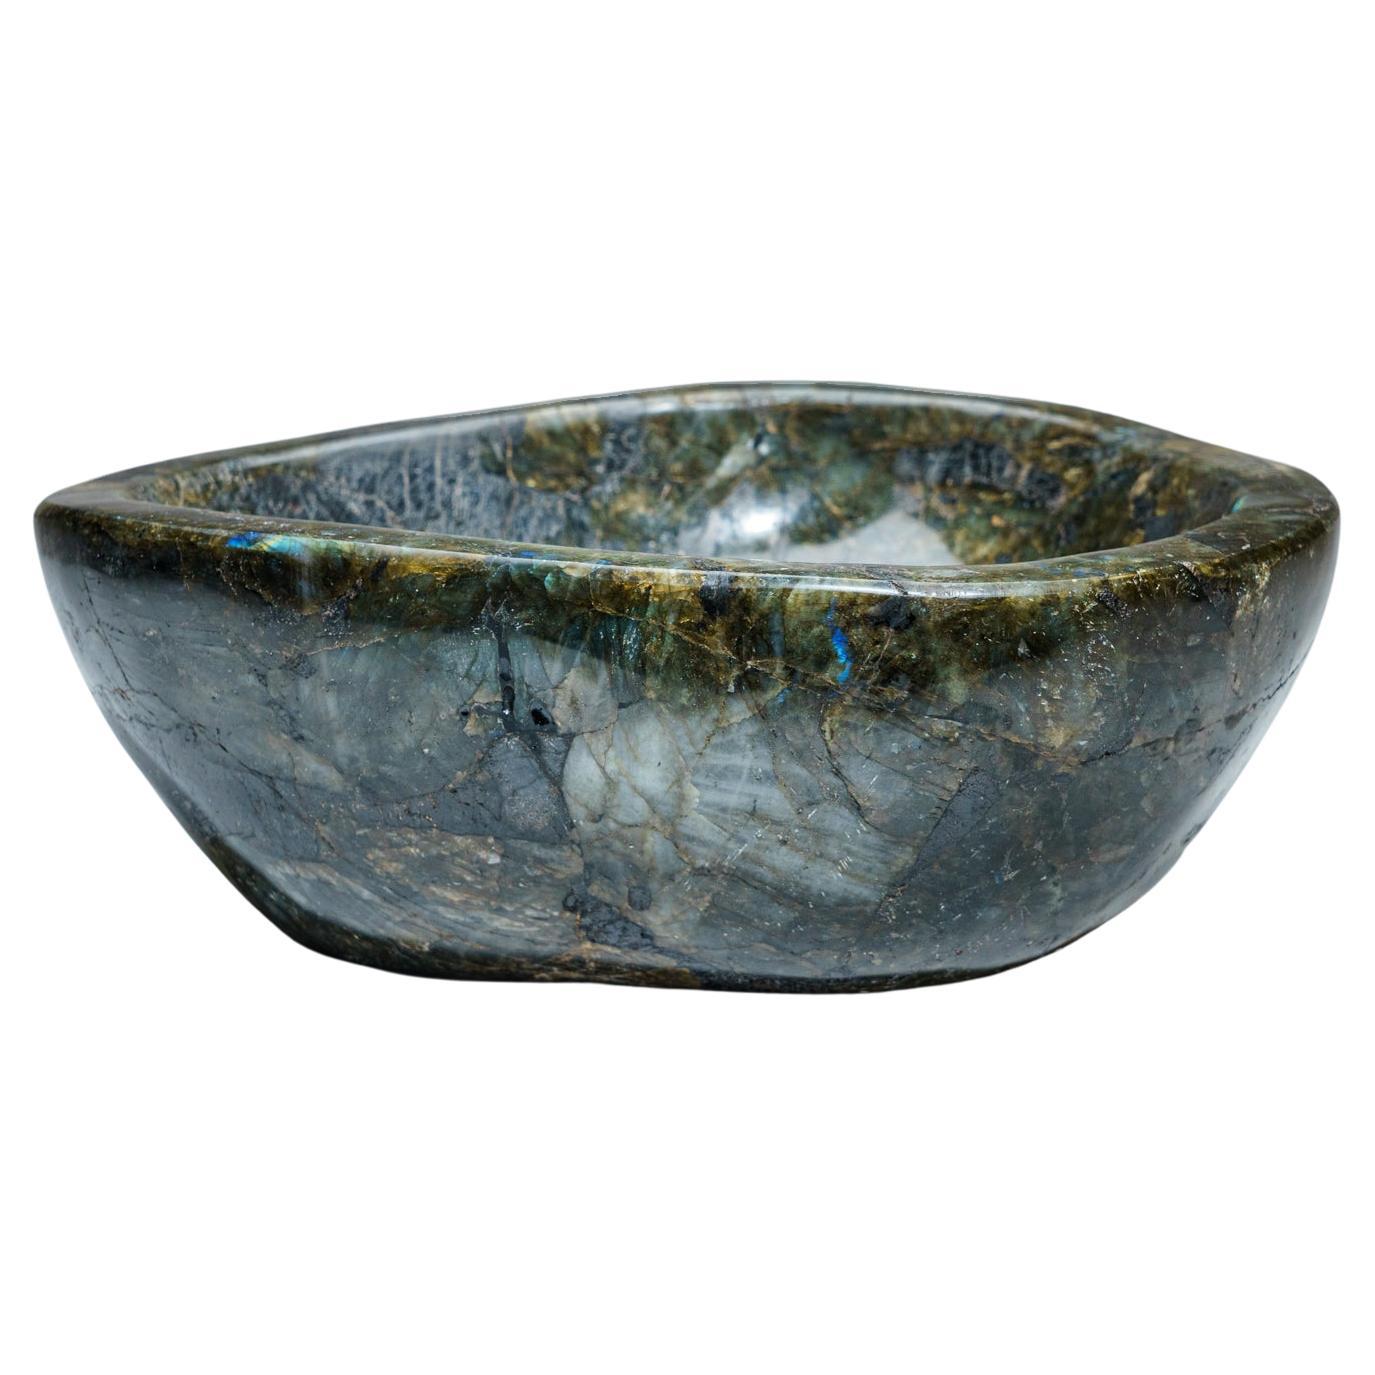 Genuine Polished Labradorite Large Bowl from Madagascar (21 lbs) For Sale